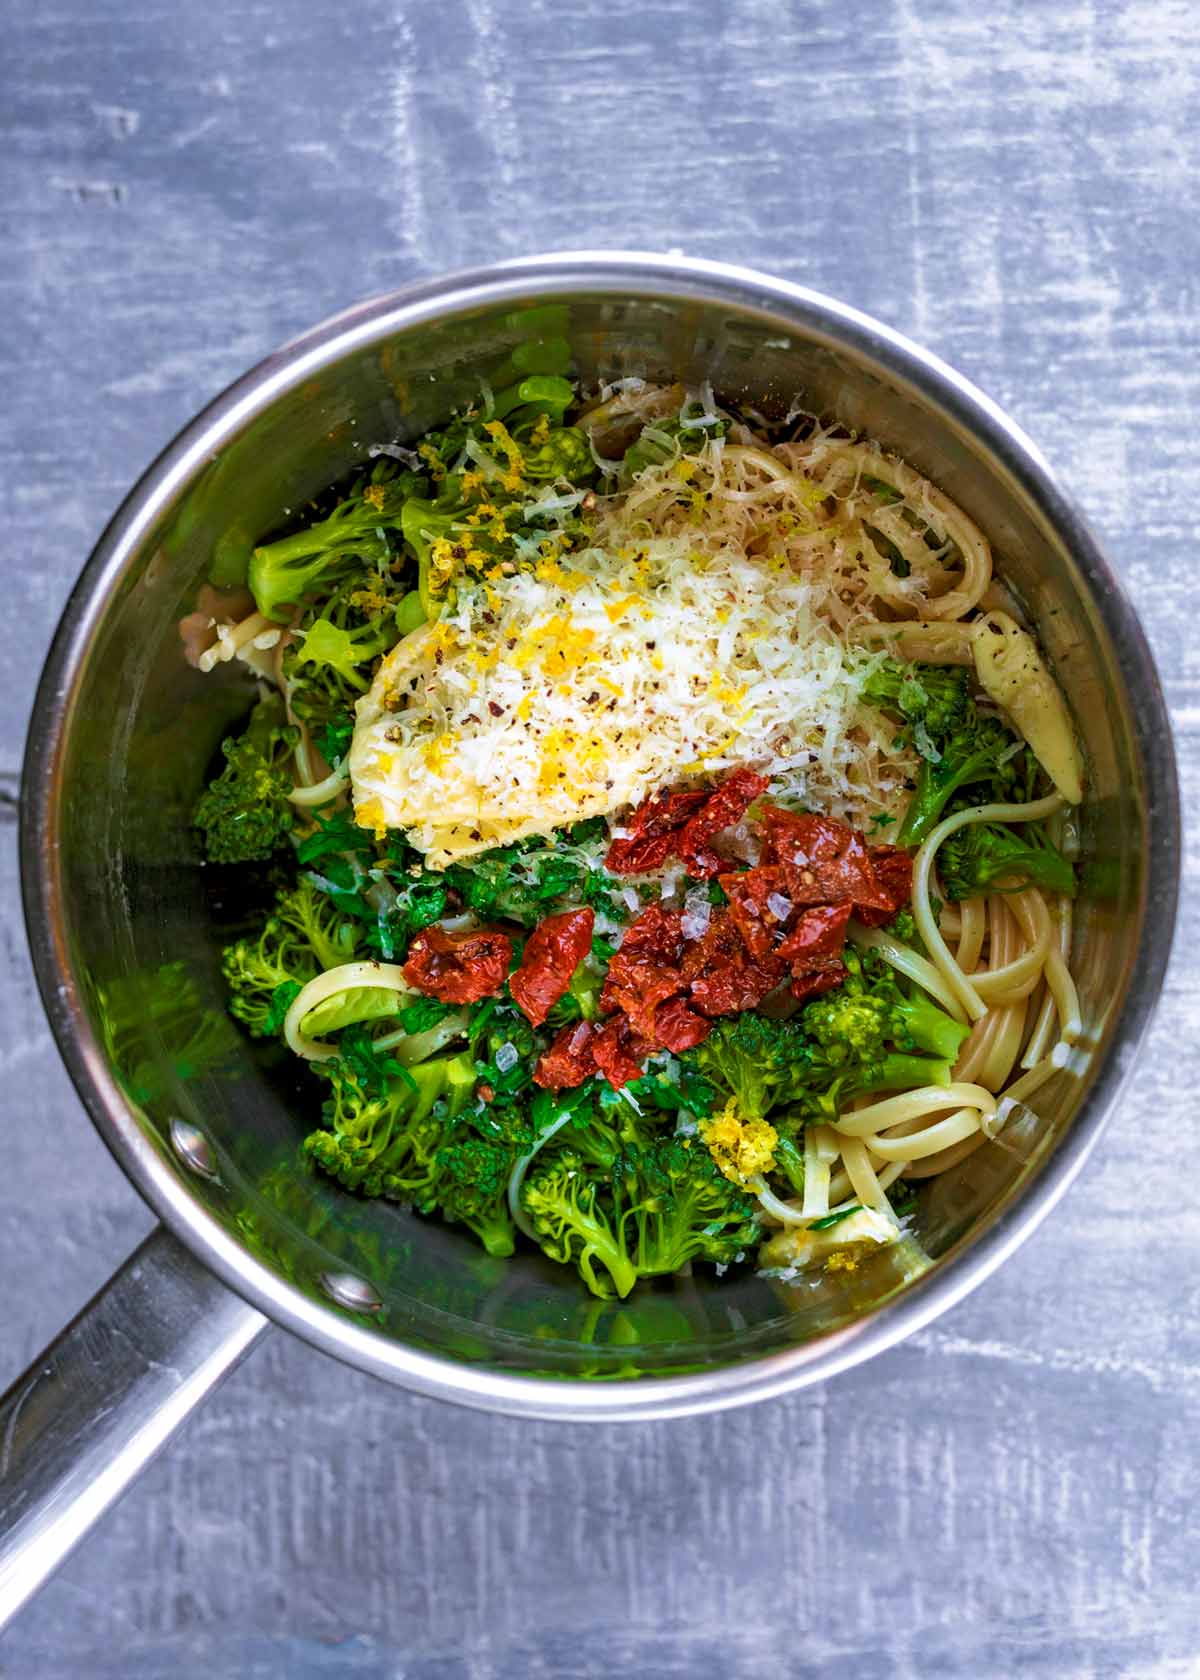 Pasta, broccoli, chopped tomatoes, cream, lemon zest and seasoning all in a stainless steel pan.